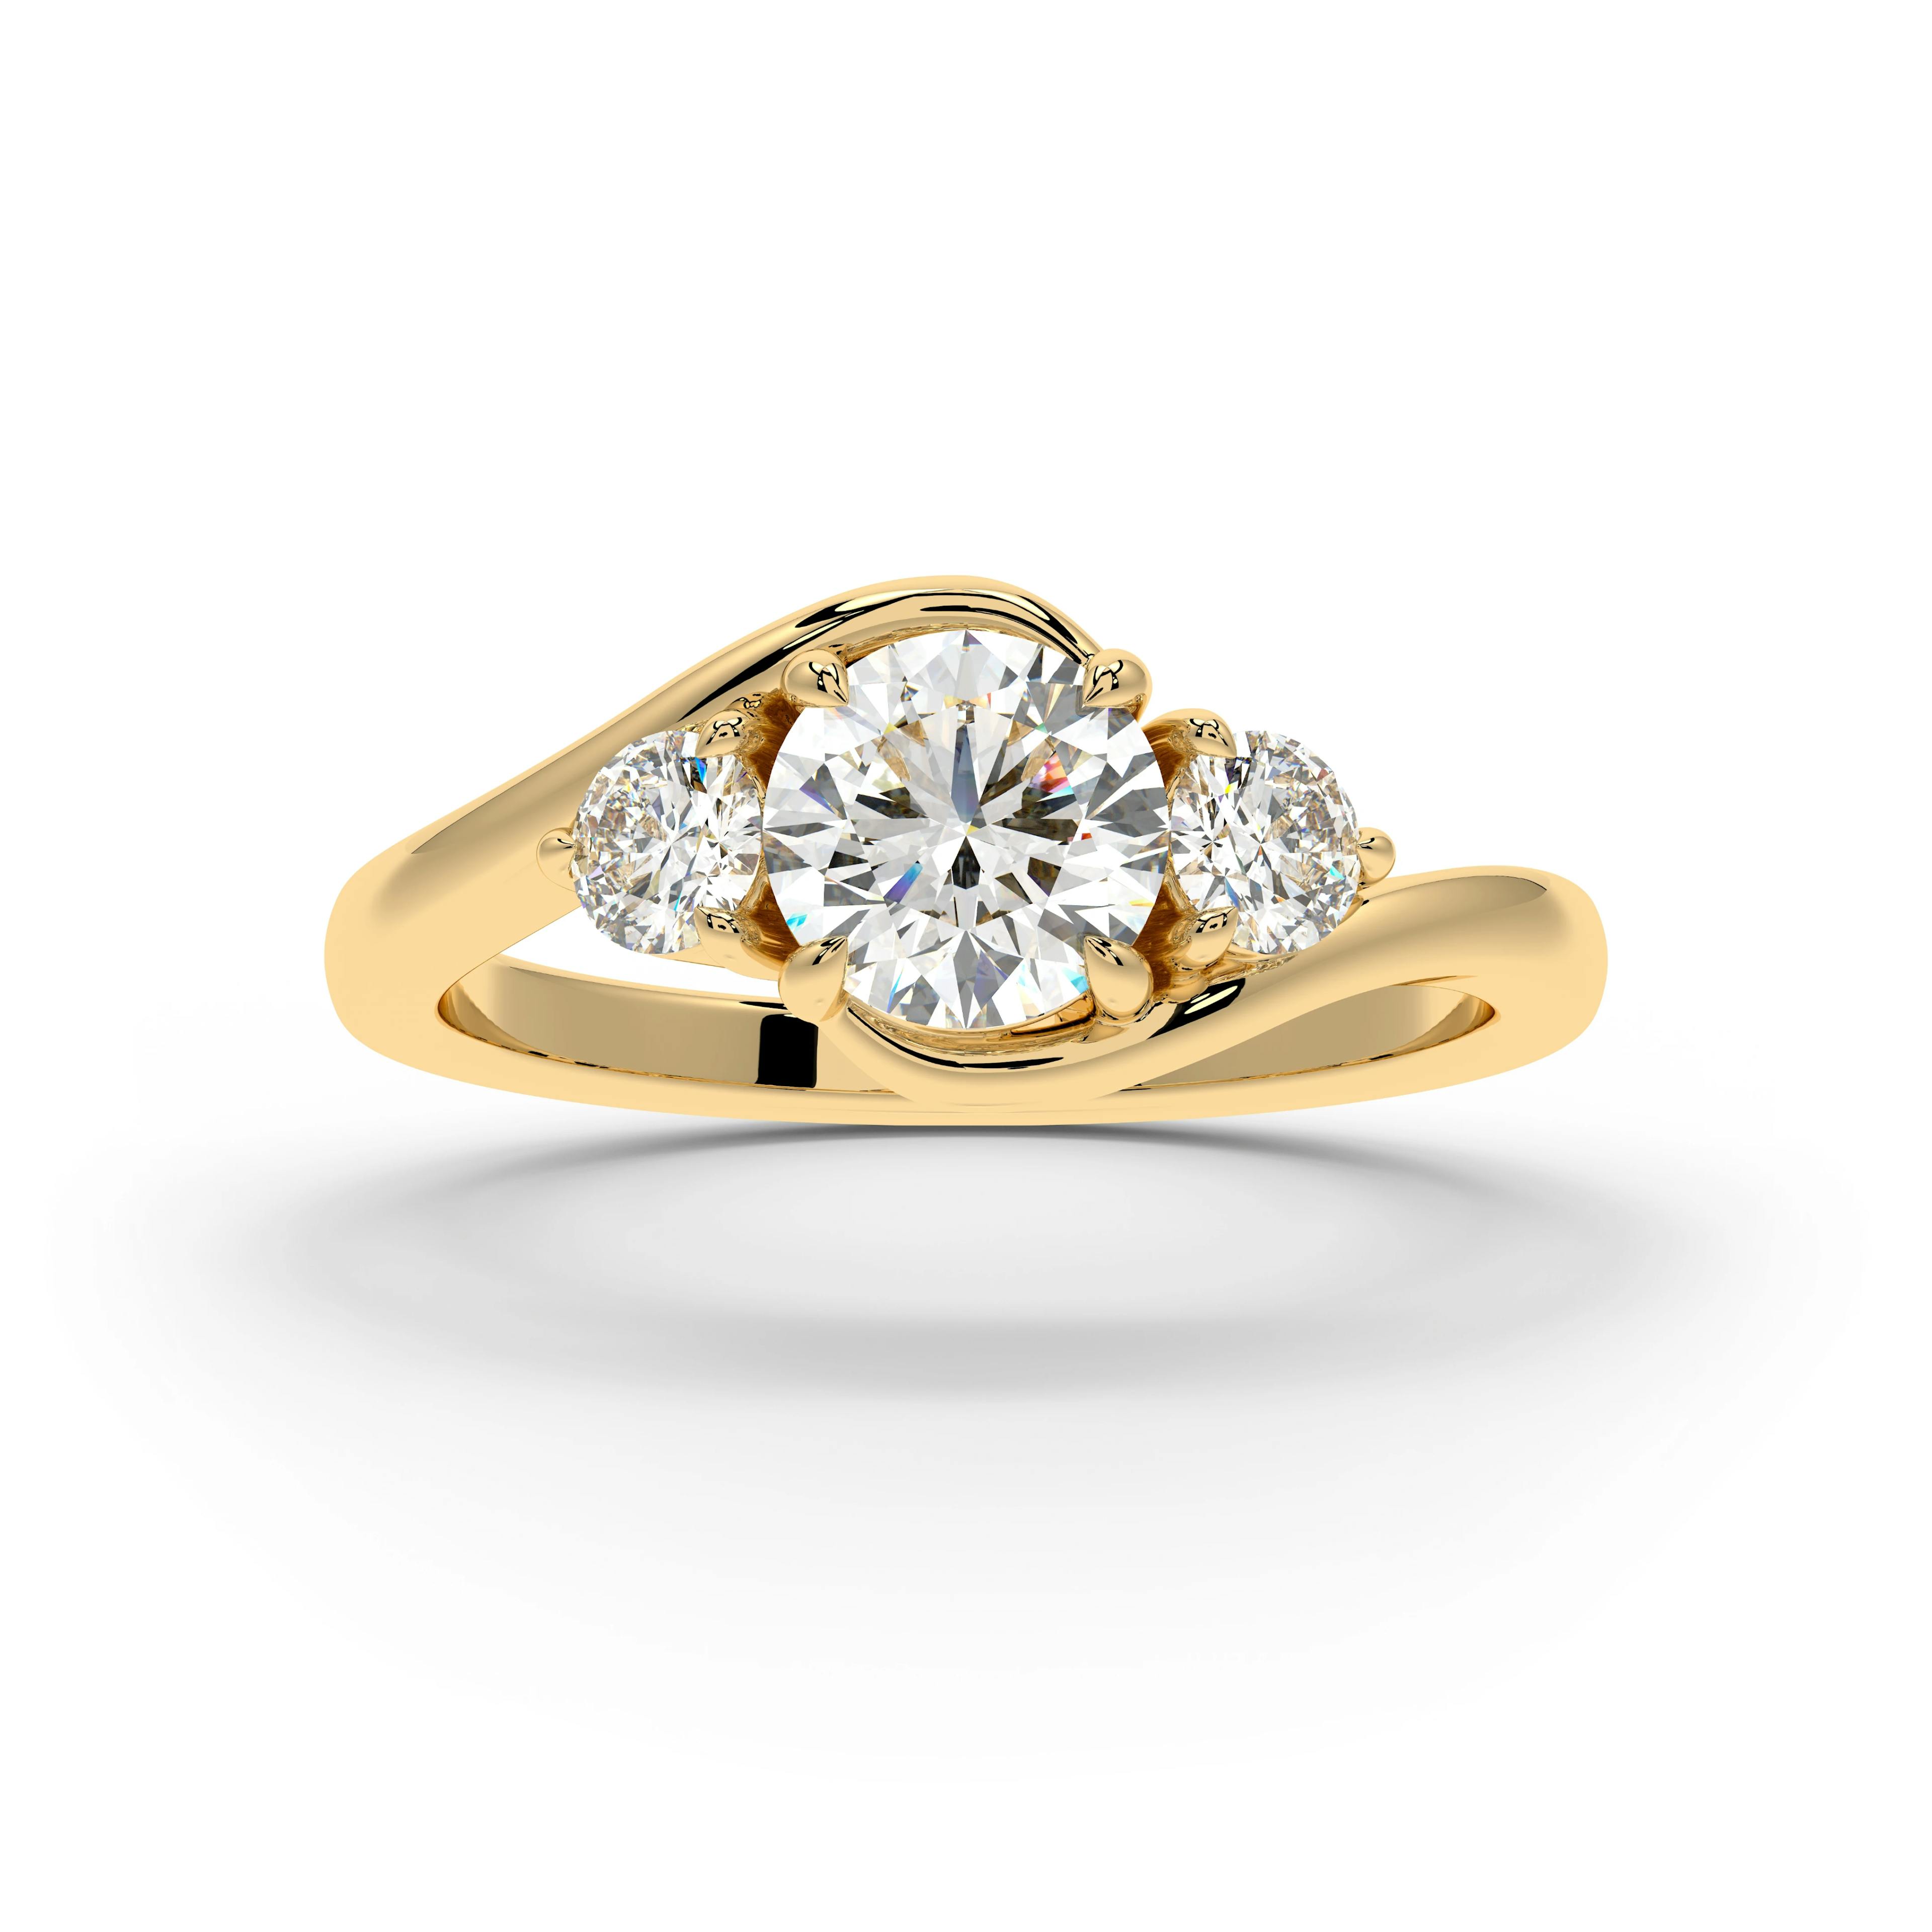 Rendered image of a 3 Stone diamond ring in Yellow Gold